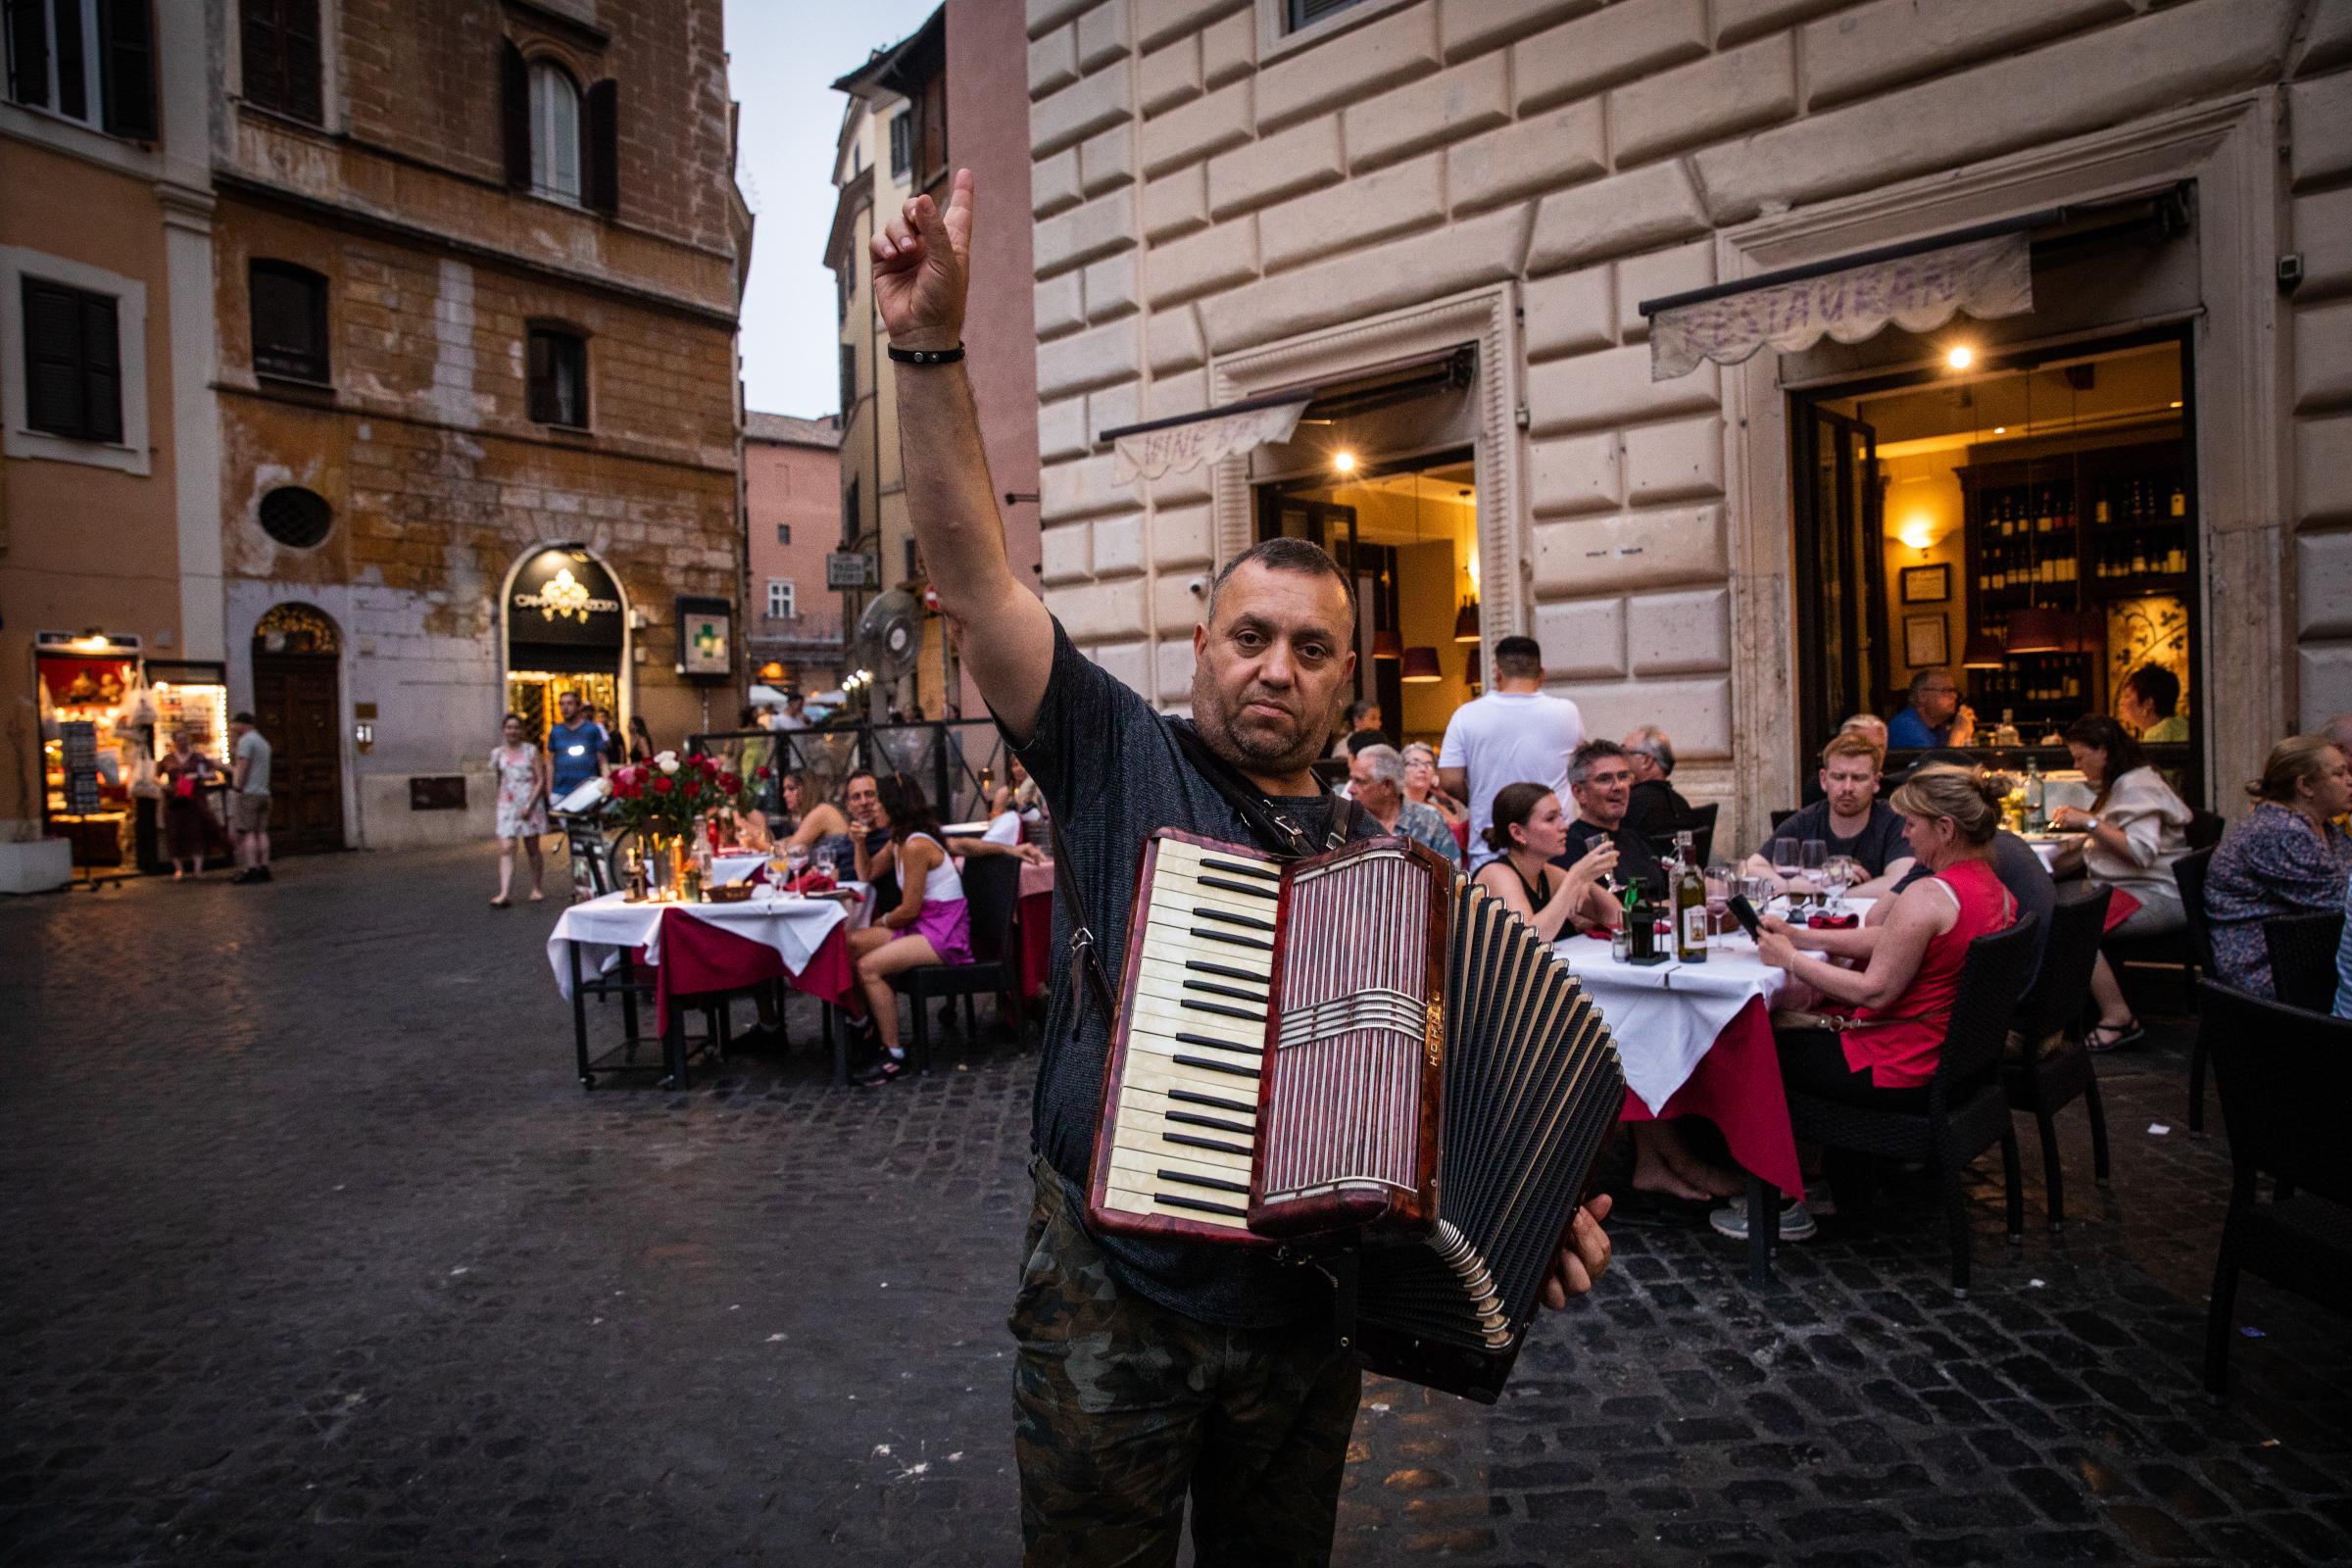 That Bad Boy Rome - A First-timer's Perspective - A man plays accordion for diners in the Piazza della Rotonda near the Pantheon in Rome.